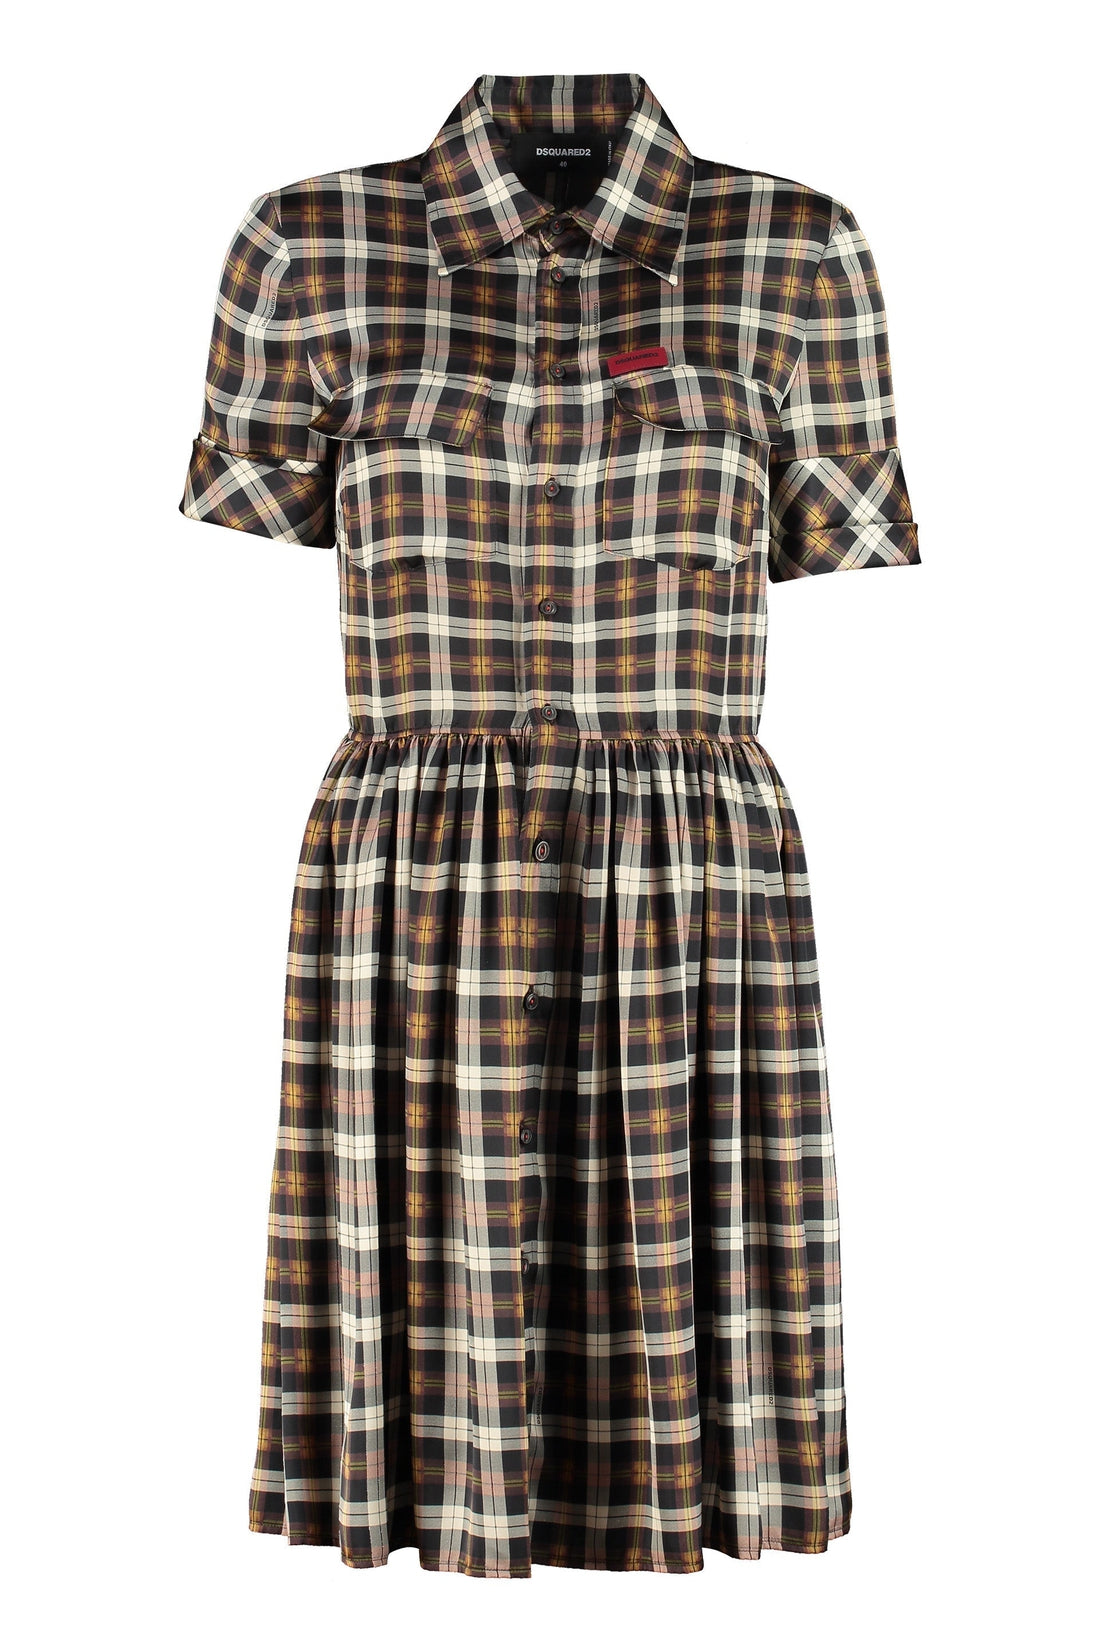 Dsquared2-OUTLET-SALE-Printed shirtdress-ARCHIVIST